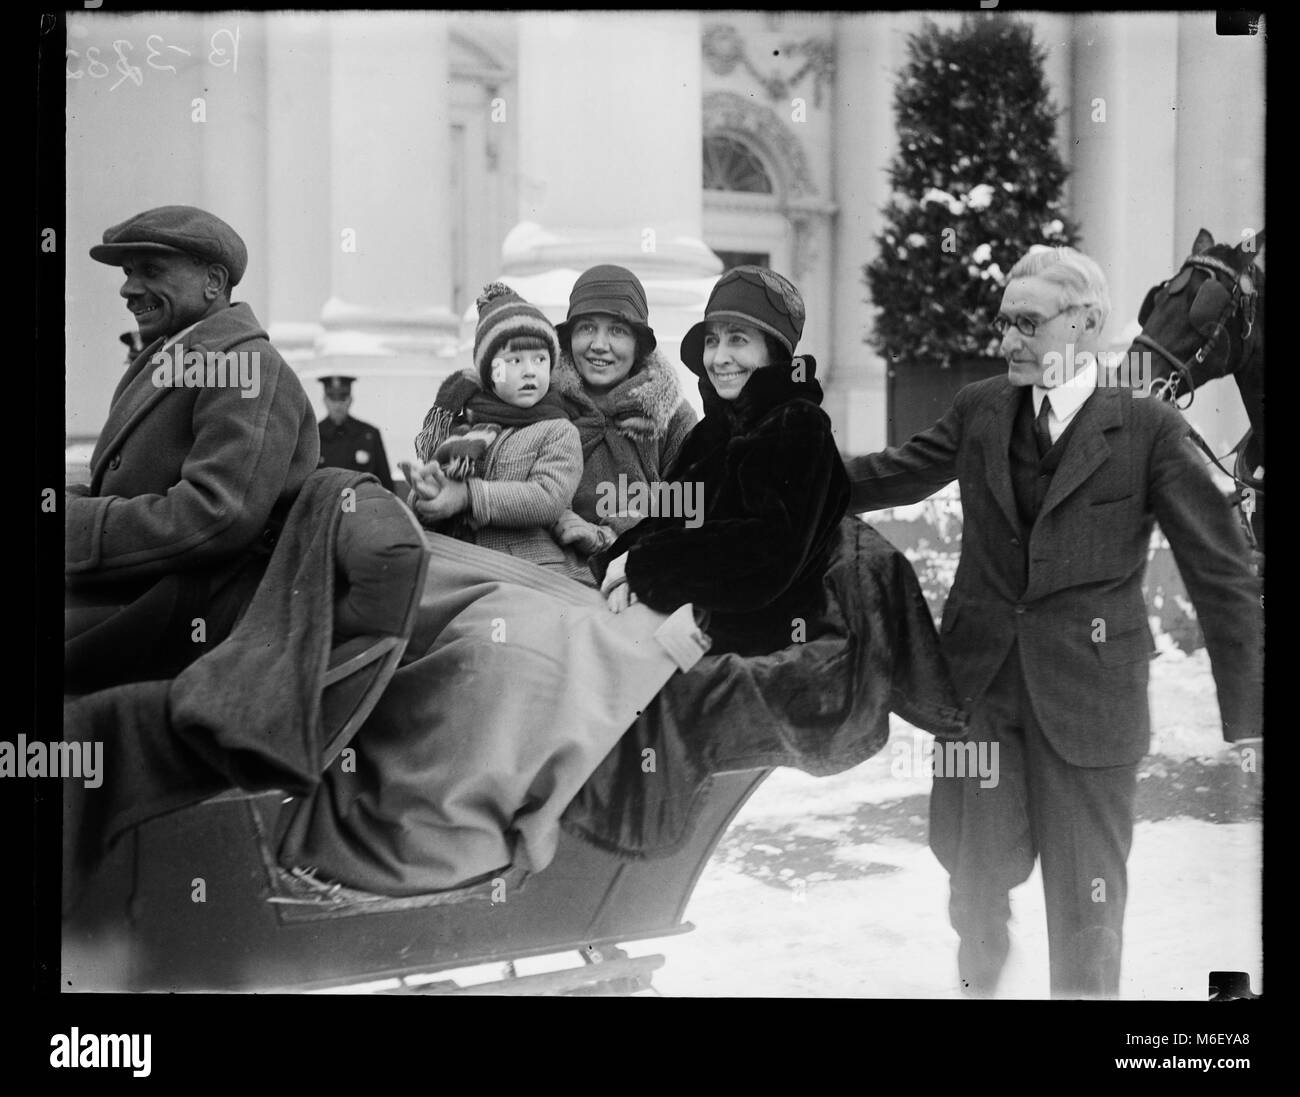 First Lady Grace Coolidge (center), seated by Chief White House Usher Ike Hoover (right), enjoys a sleigh ride on White House grounds with unidentified woman, child and driver, Washington, DC, 1929. Stock Photo